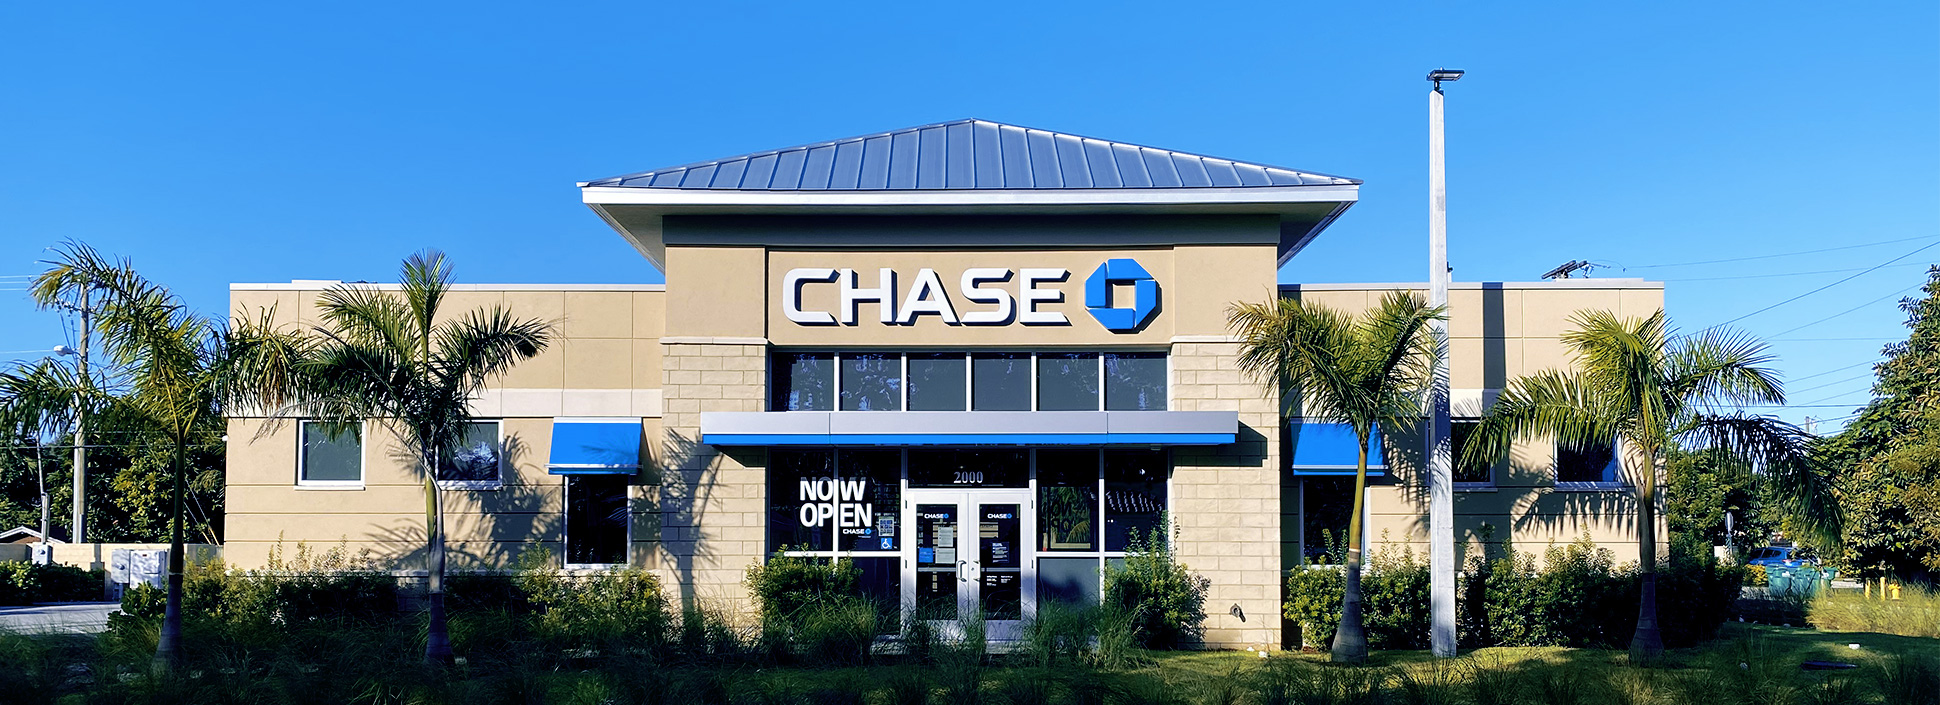 what time does chase bank close on wednesday